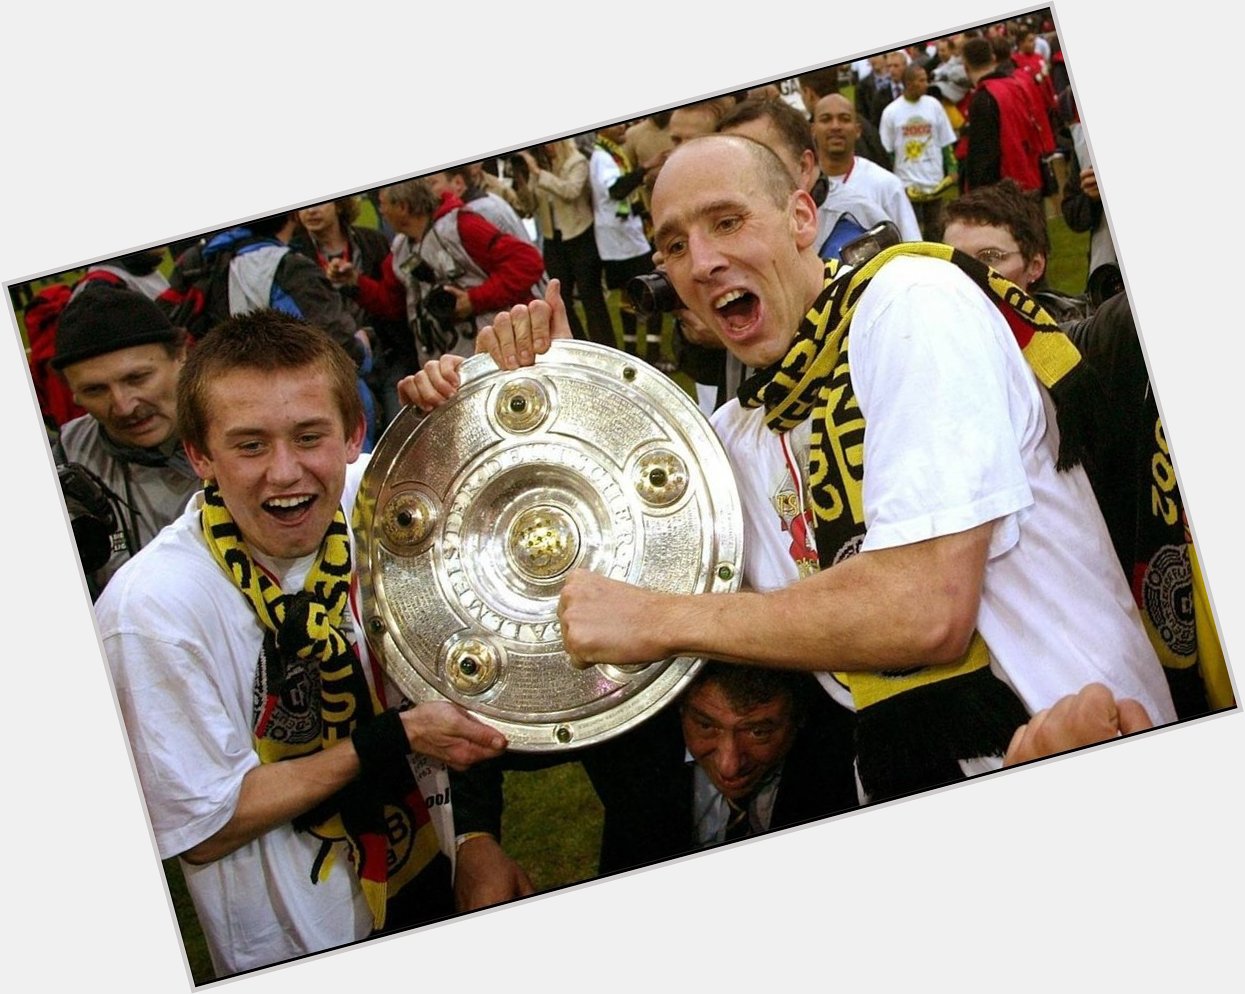 What a great picture this is. 

Happy Birthday big man Jan Koller! 